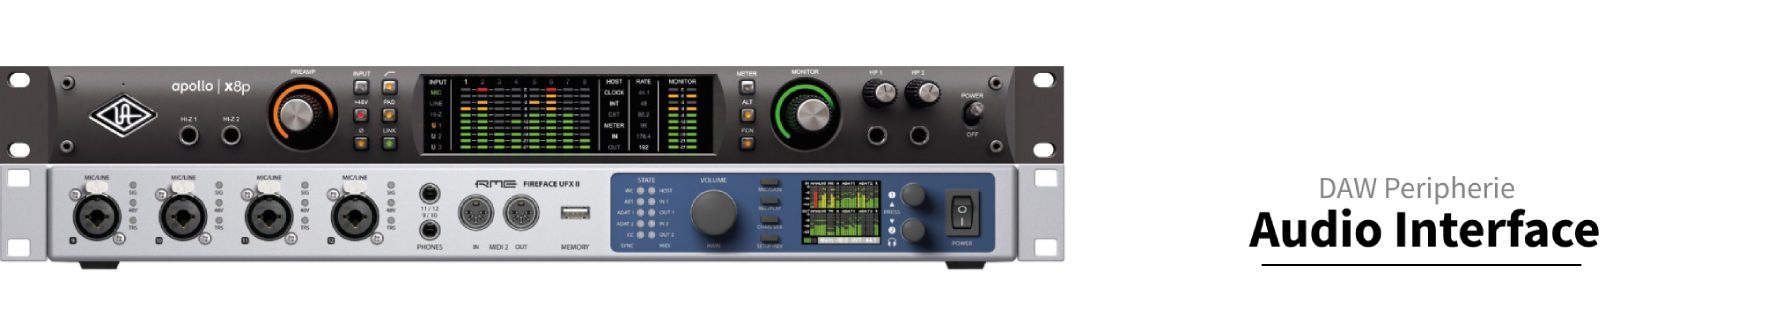 Audio Interface-8 Outputs-8 Preamps